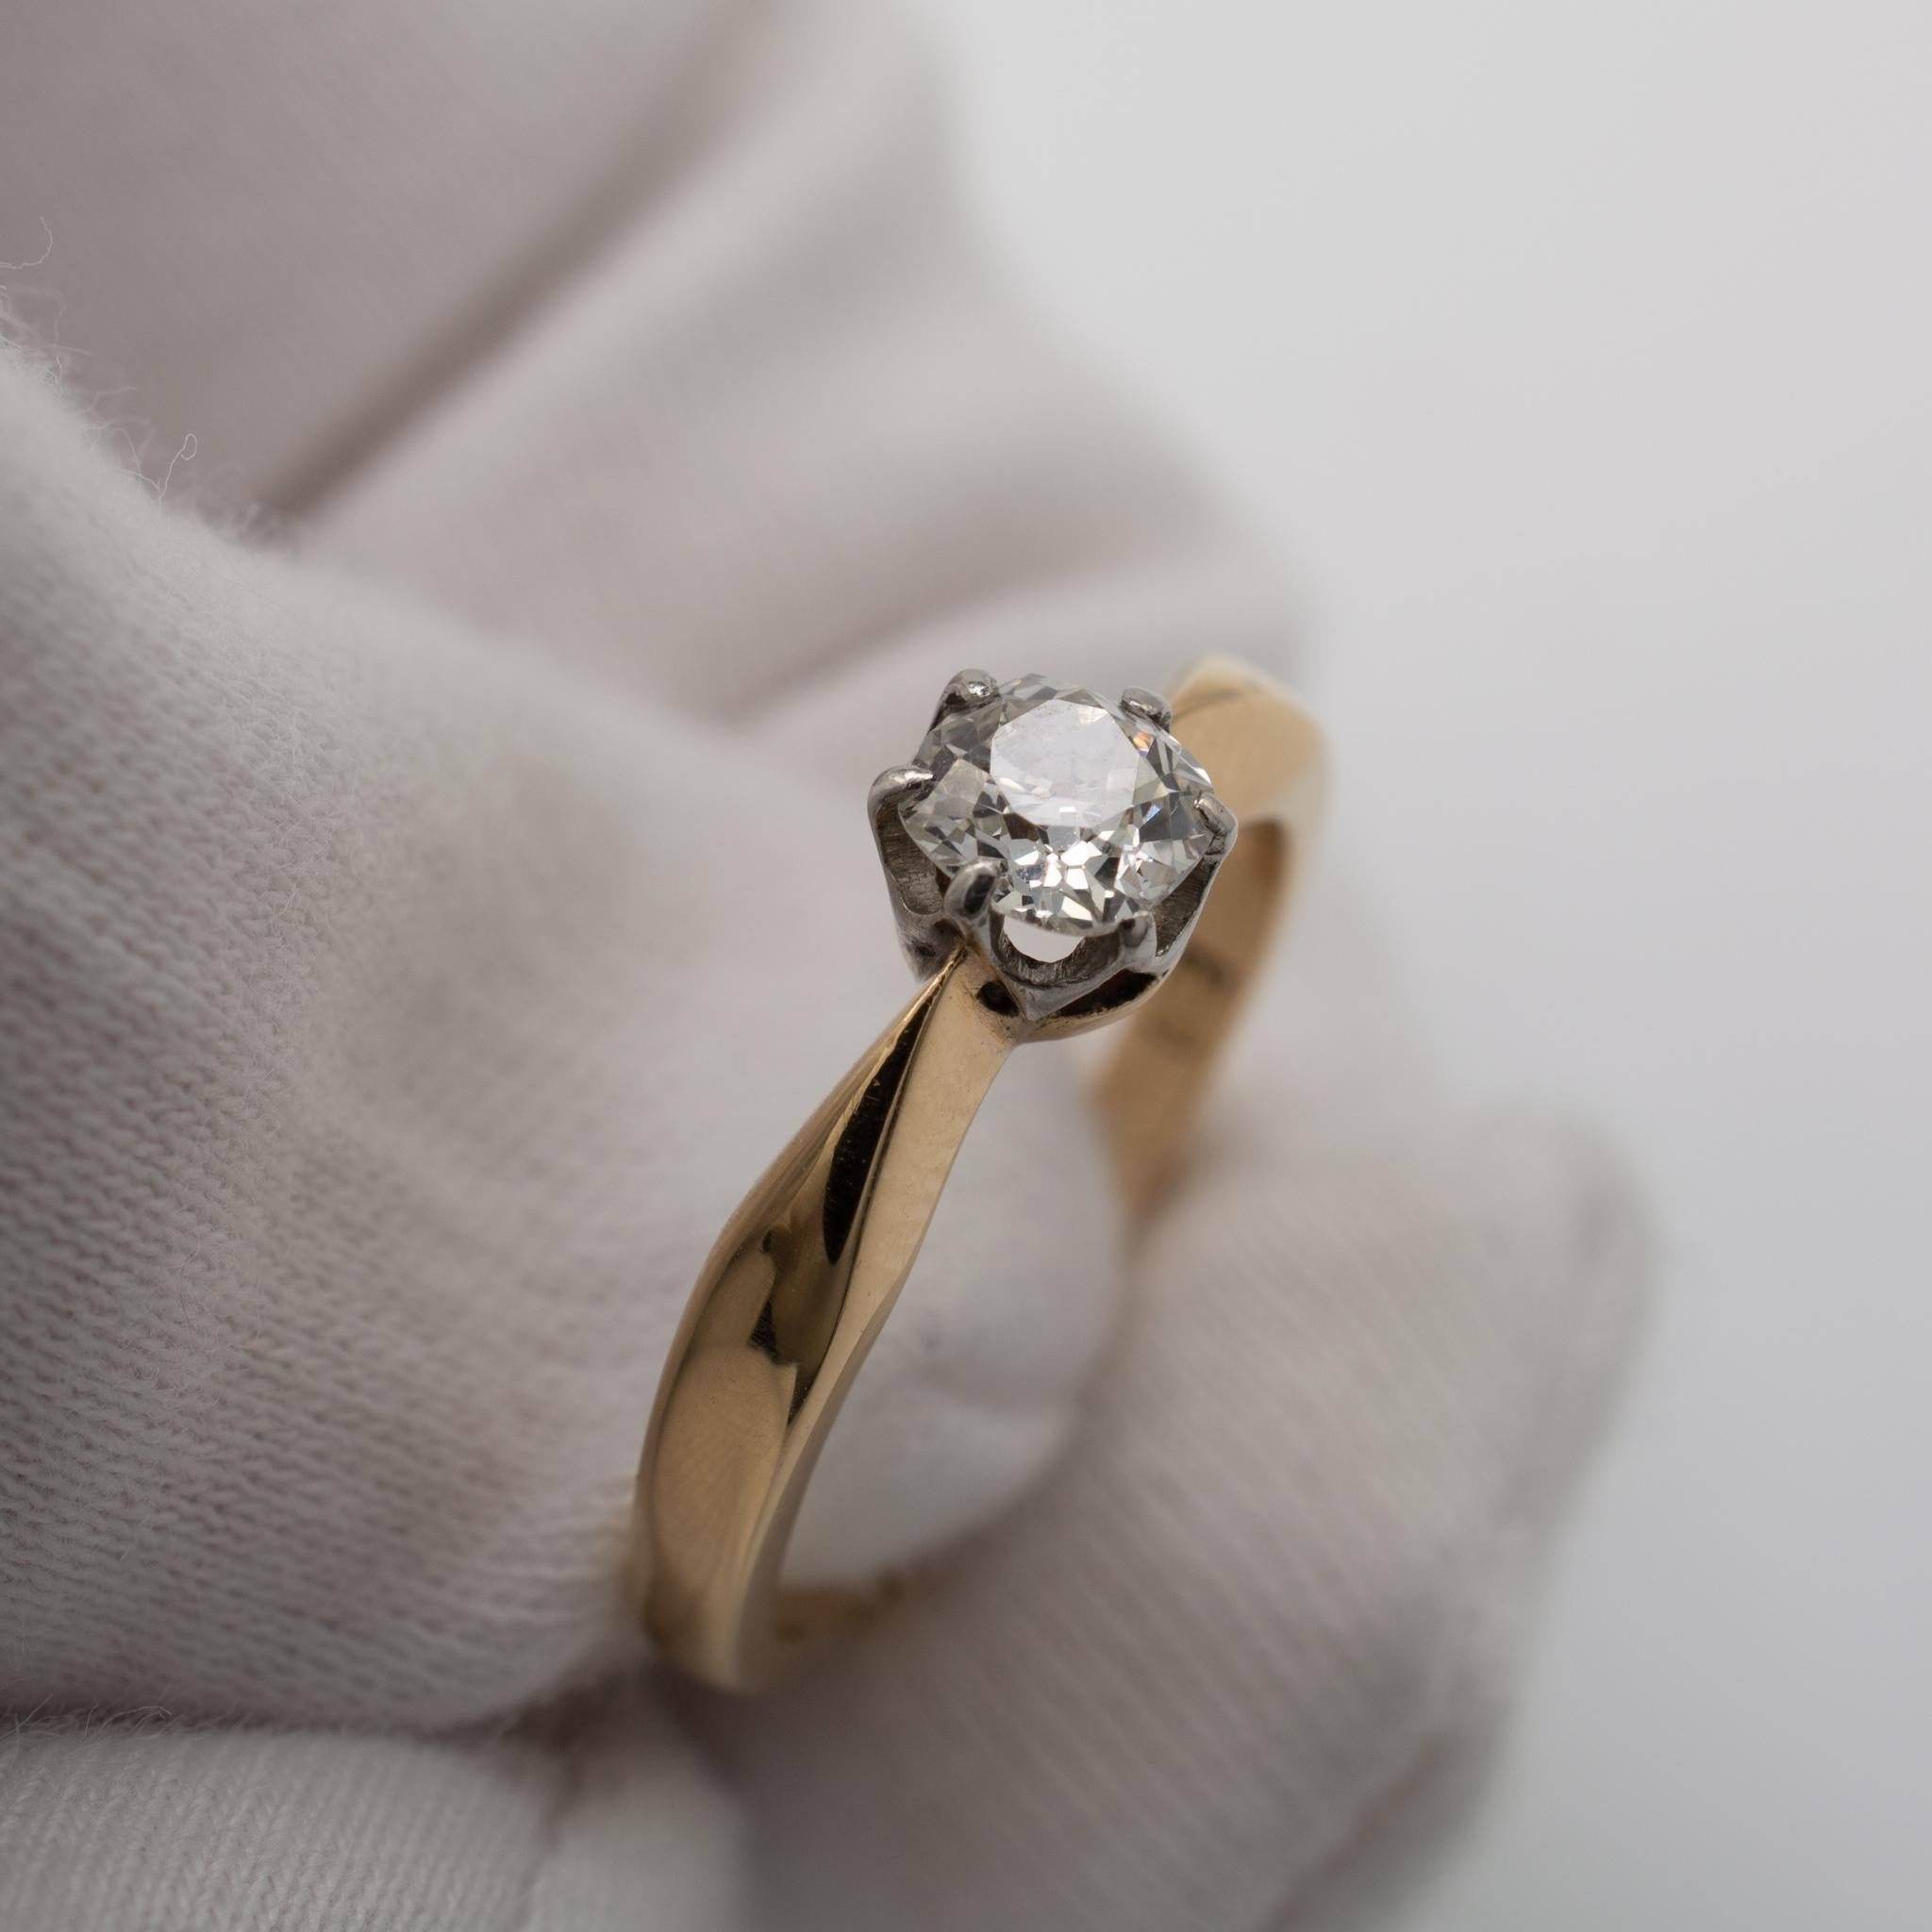 Diamond Solitaire Engagement Ring 0.50 Carat Old Cut, 18 Karat Gold, circa 1970s For Sale 1